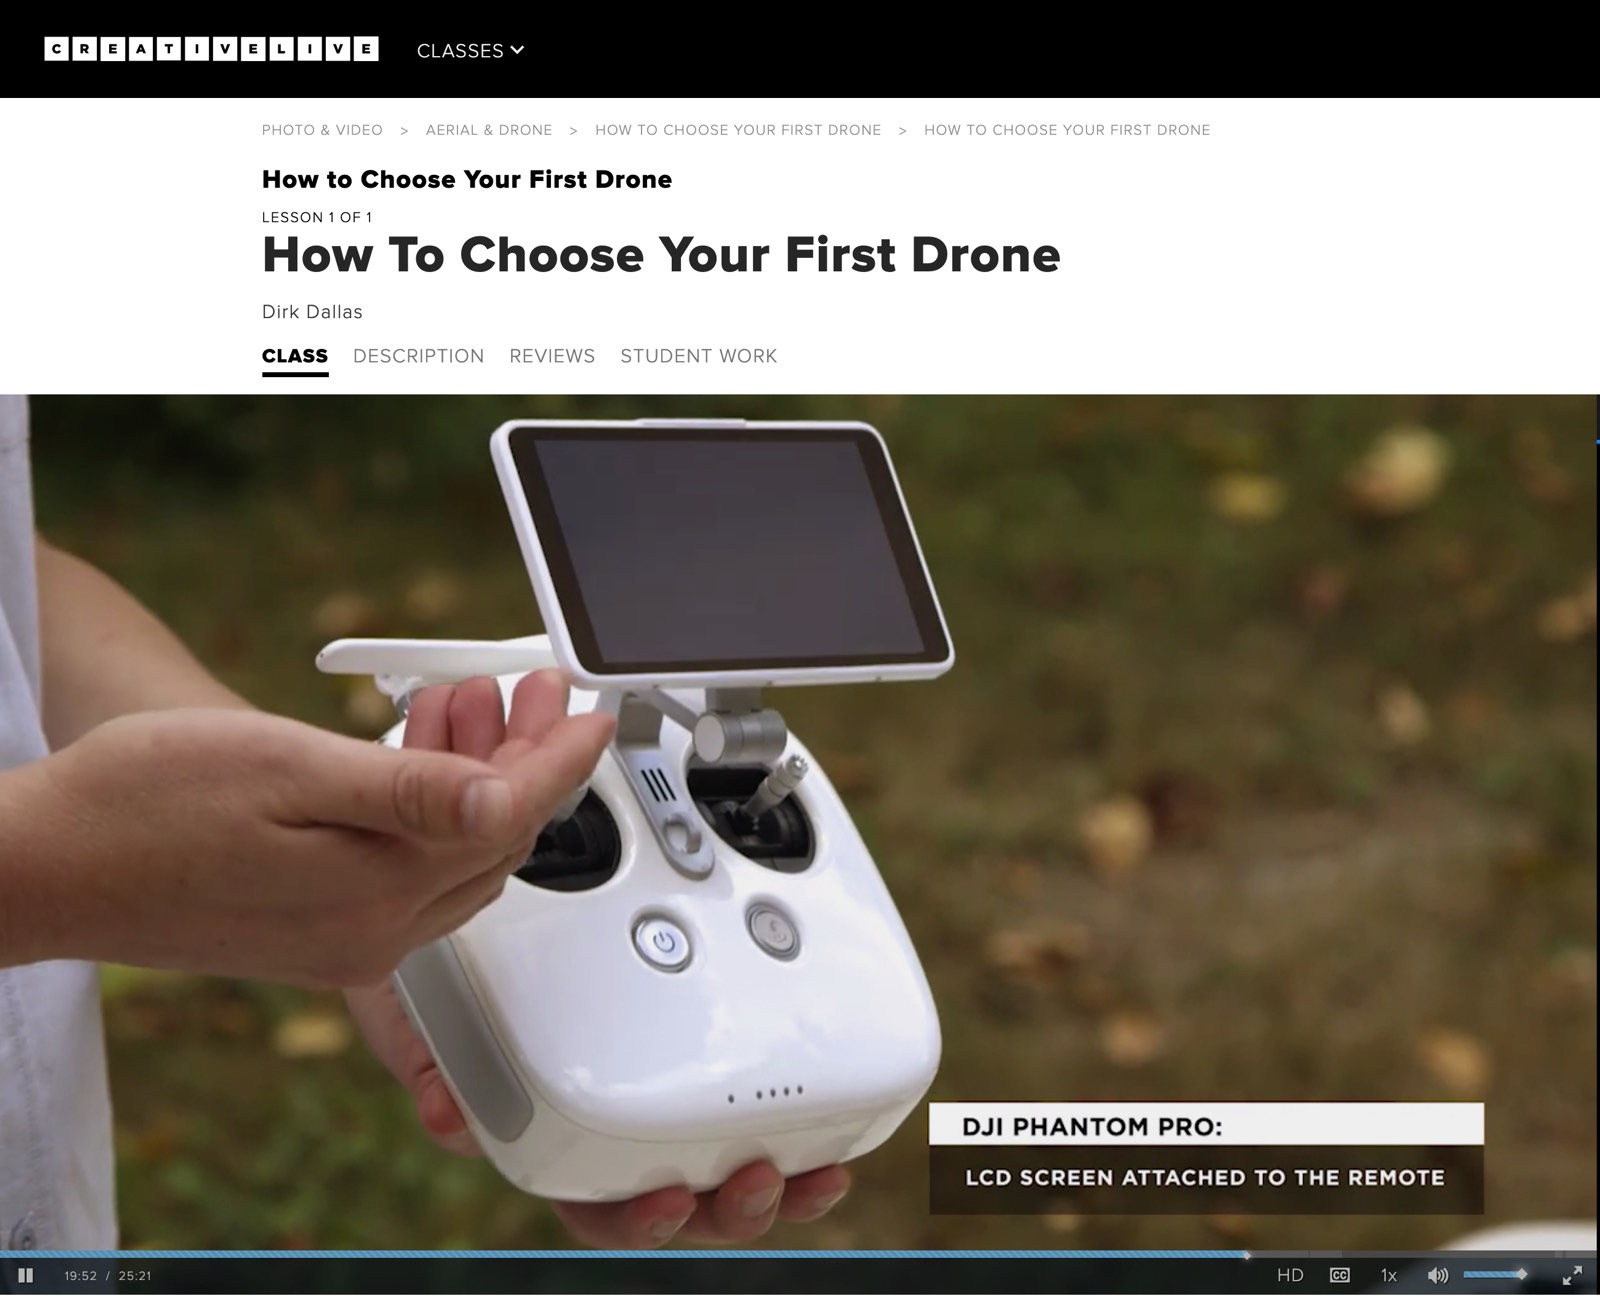 Dirk Dallas CreativeLive Course How to Chose a Drone